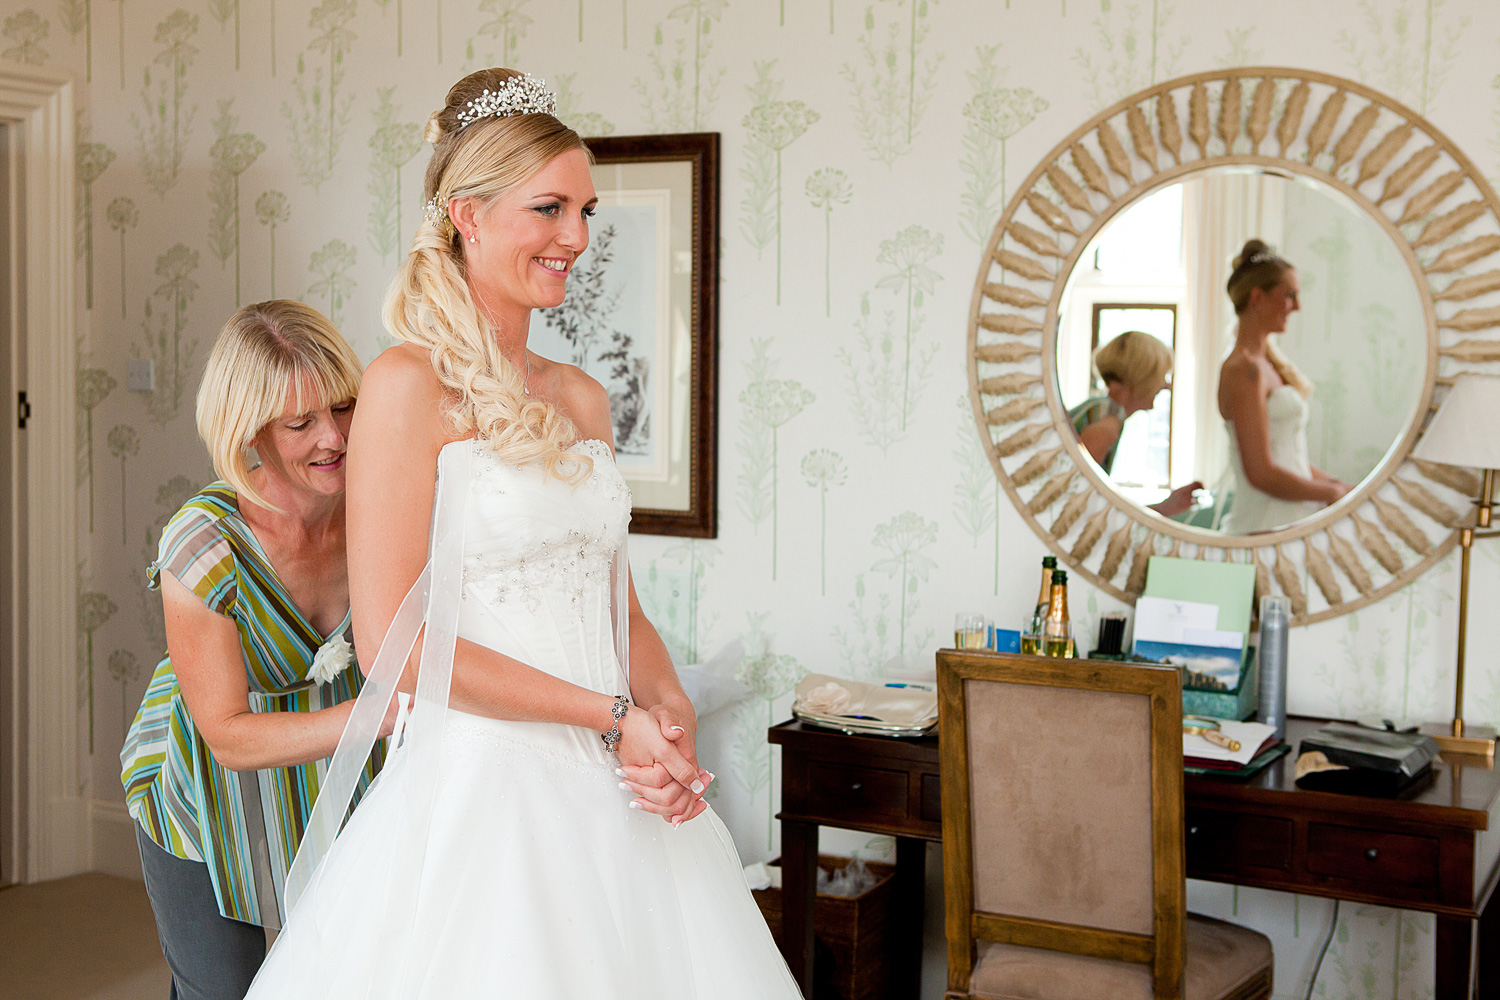 Bride's mother assisting her daughter into her wedding dress. 